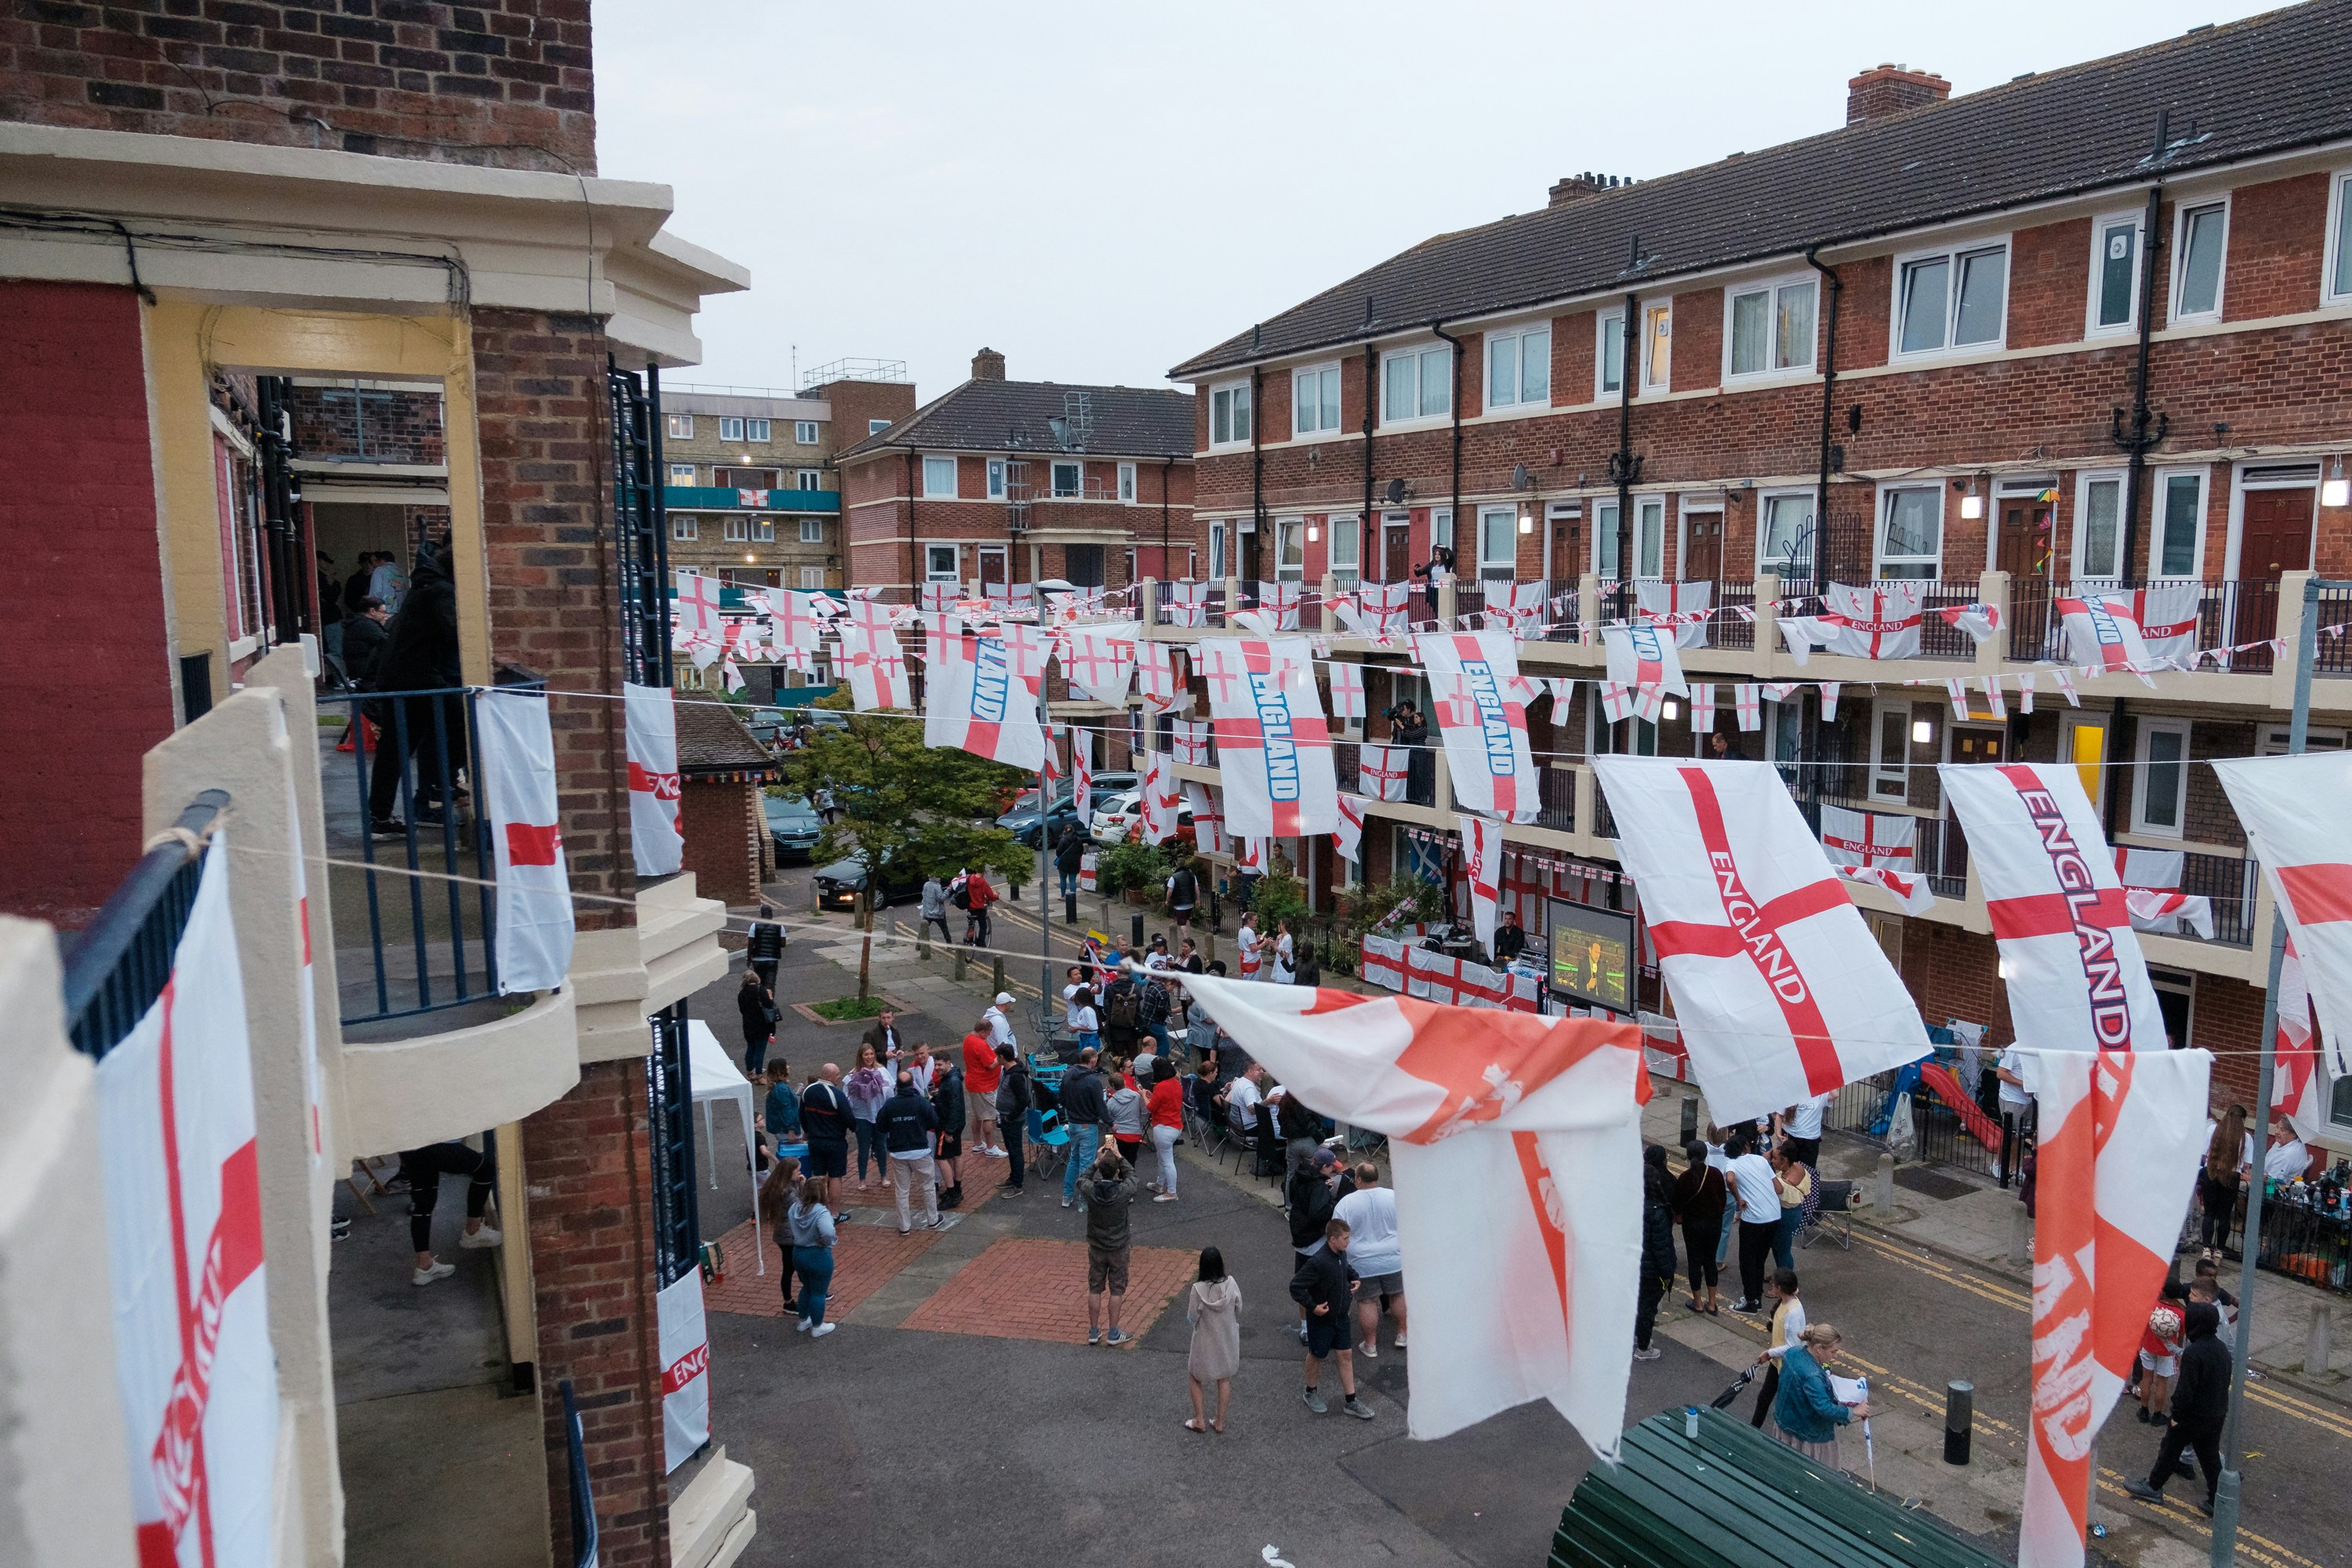 A Community Estate Watching the Euro 2020 Finals Match on the street